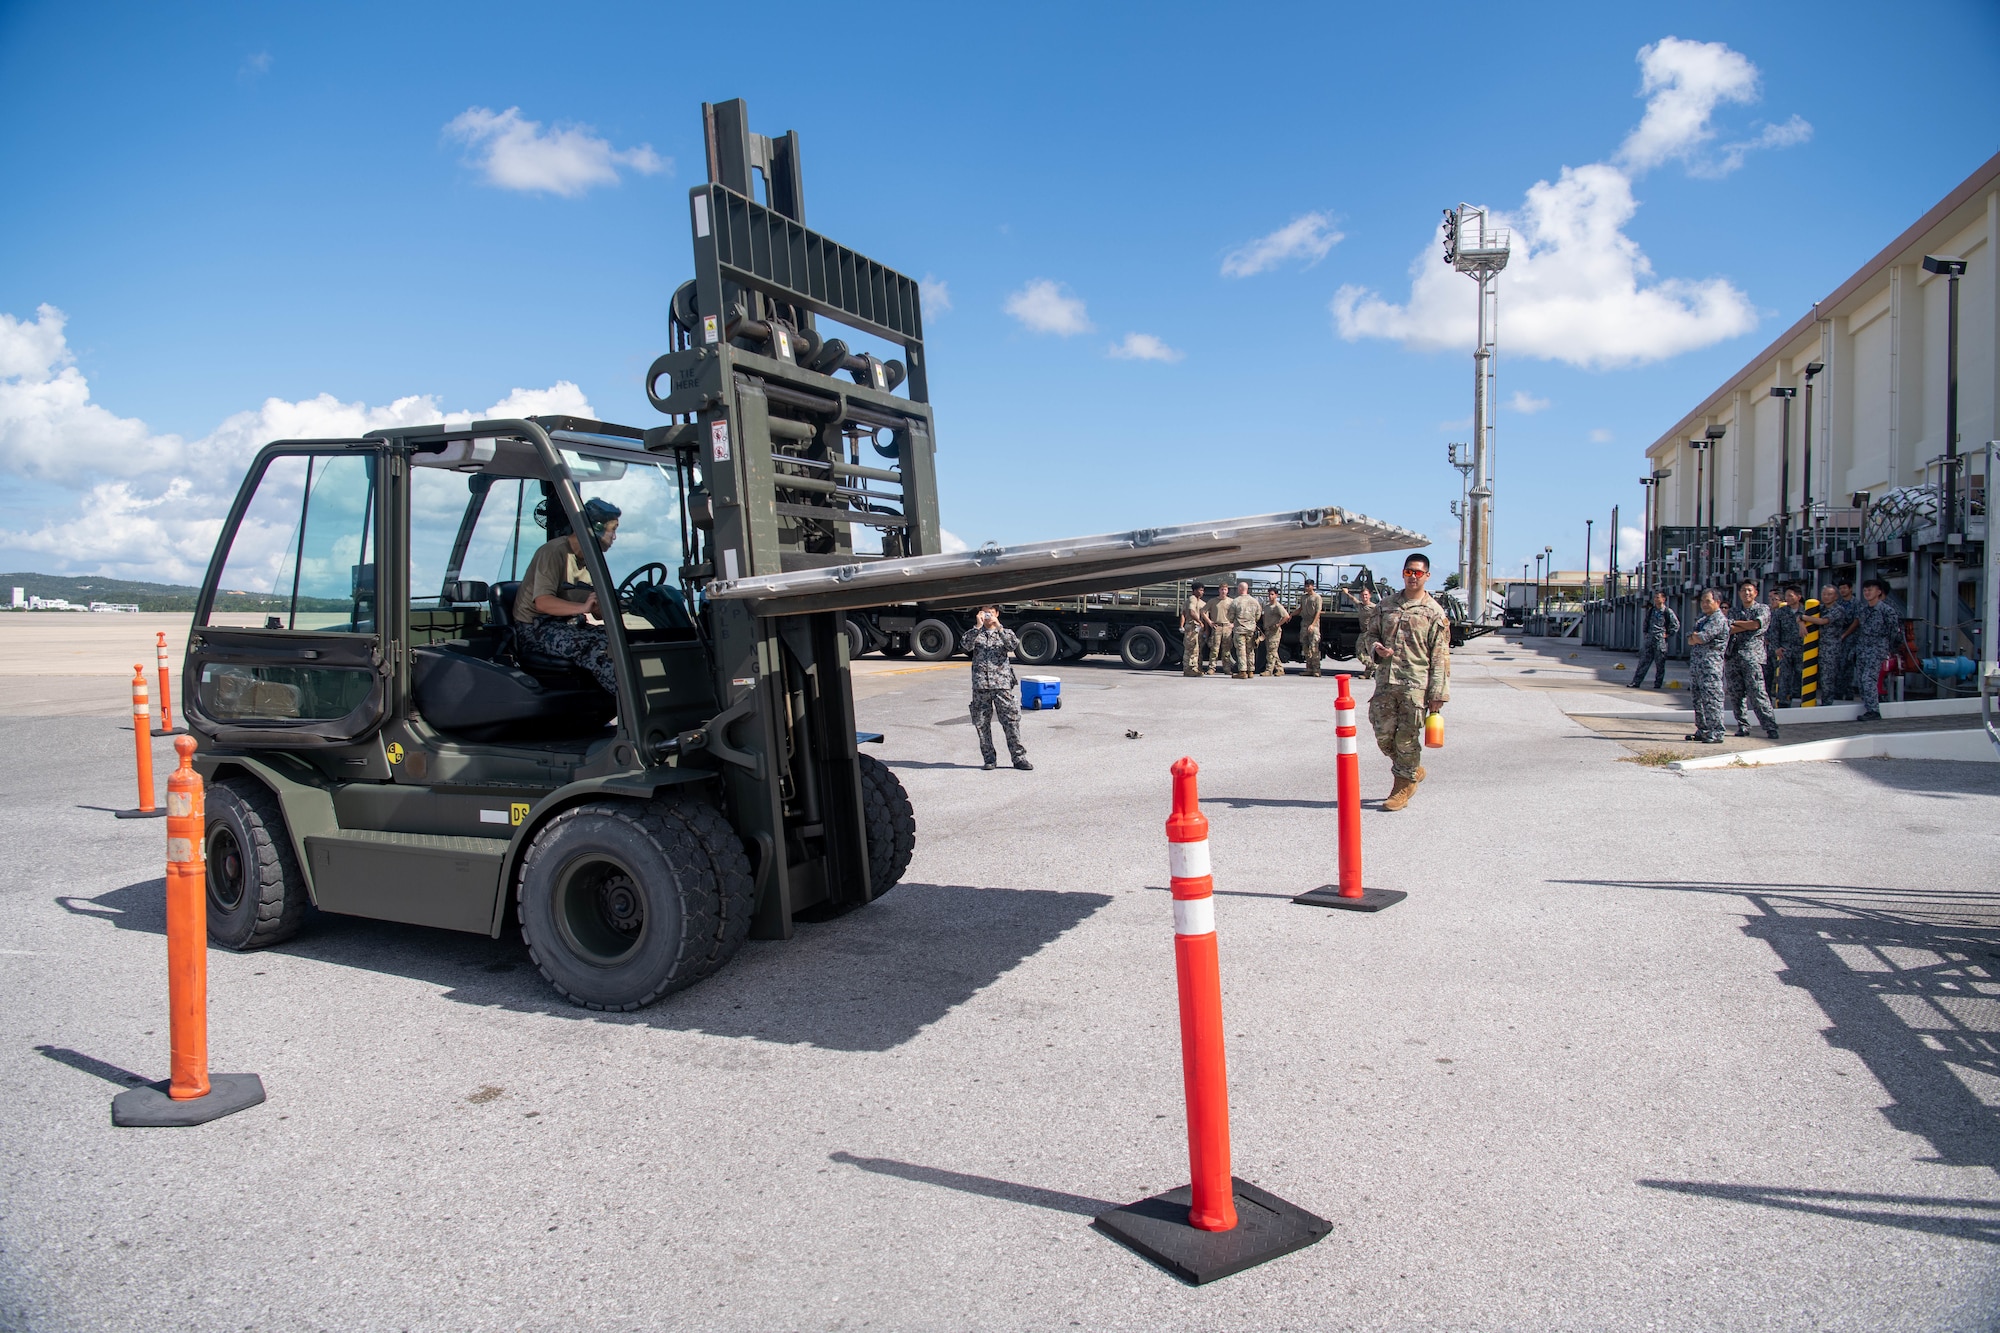 Japan Air Self-Defense Force and and U.S. Air force work together during a forklift exercise.